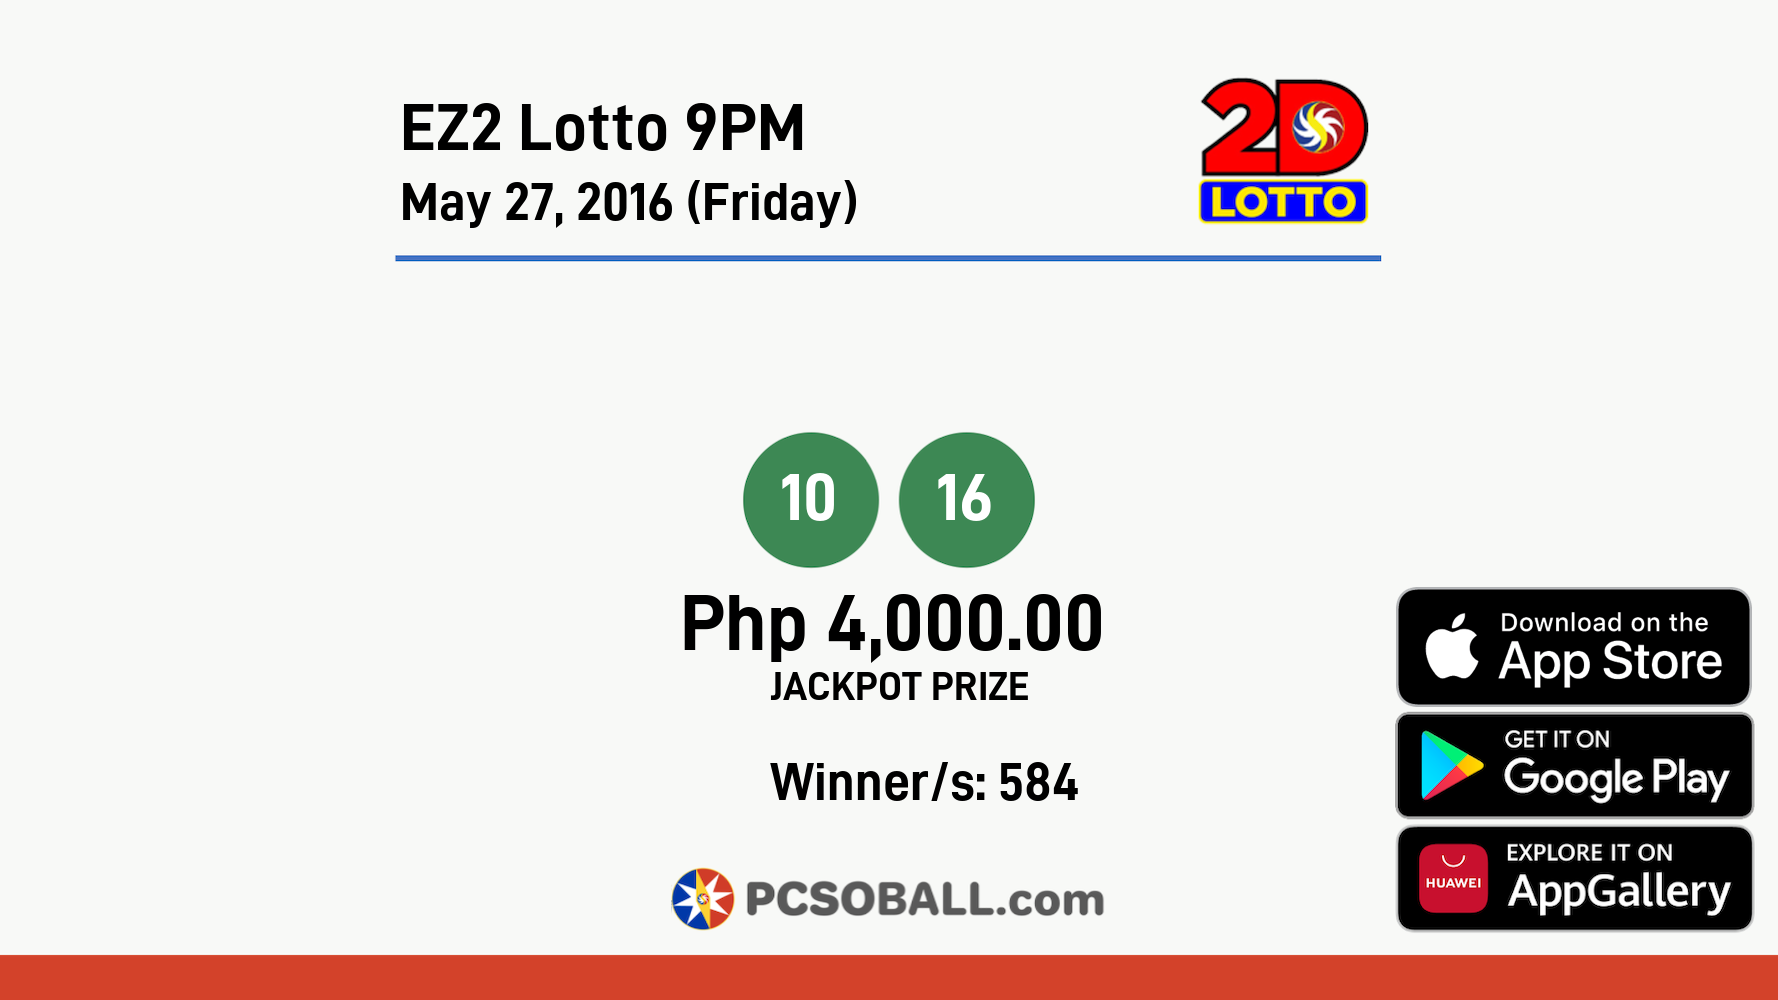 EZ2 Lotto 9PM May 27, 2016 (Friday) Result